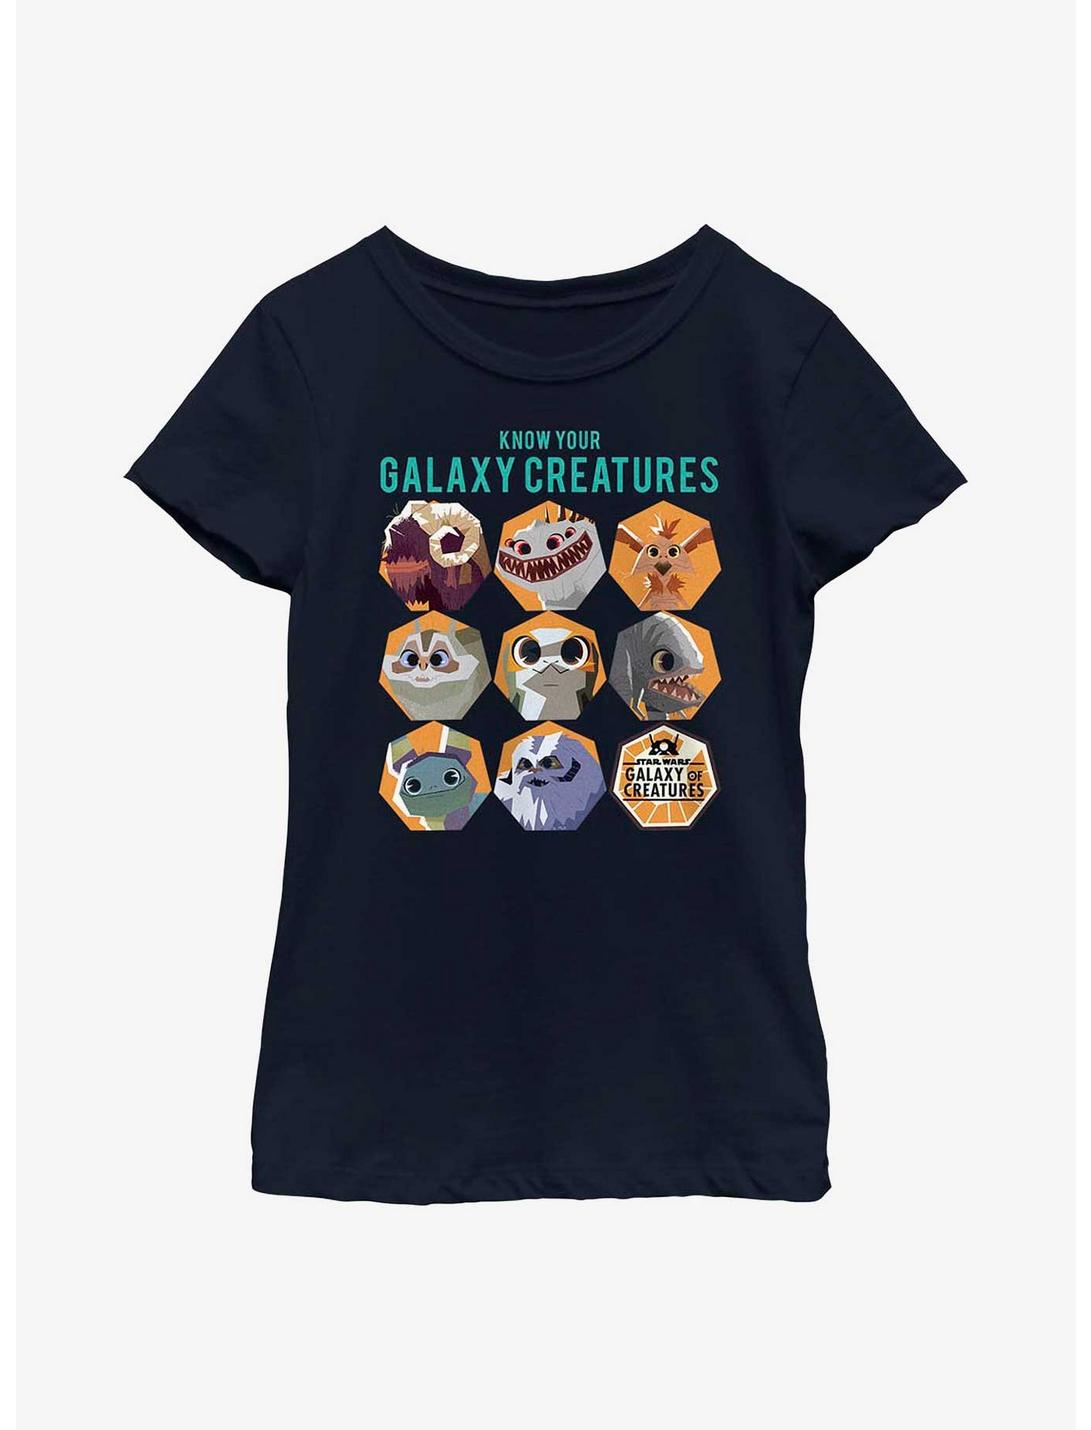 Star Wars Galaxy Of Creatures Creature Chart Youth Girls T-Shirt, NAVY, hi-res